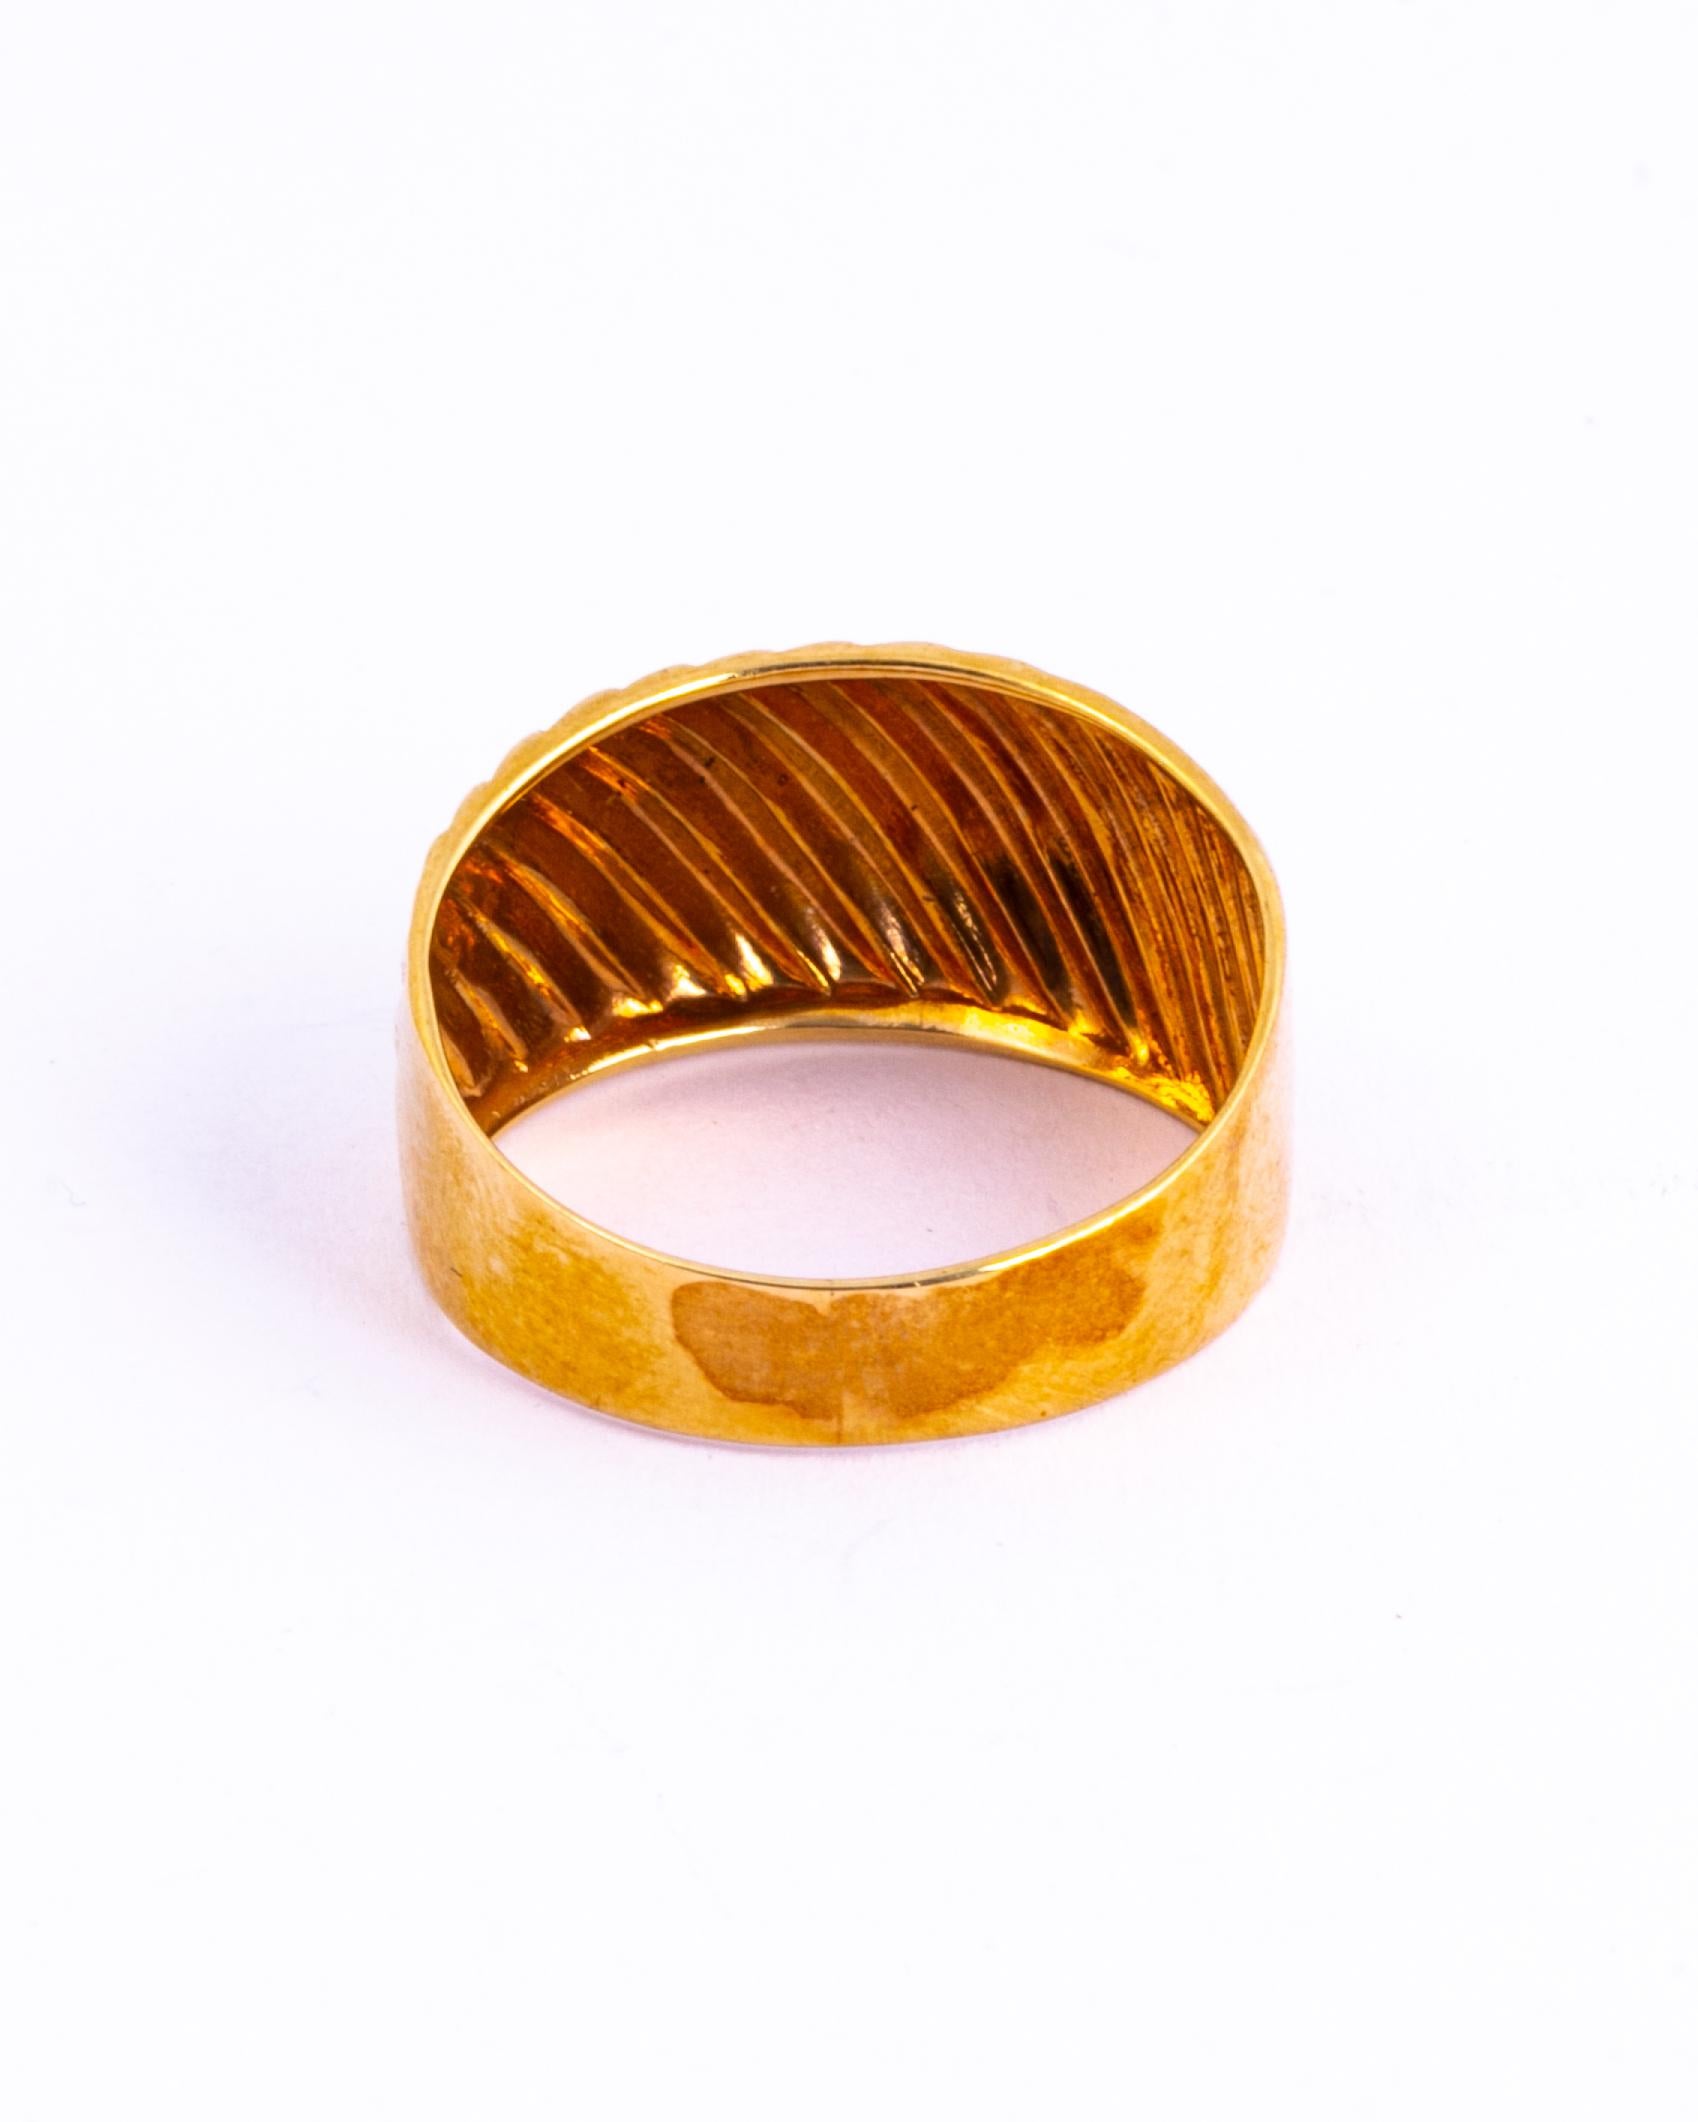 Vintage 9 Carat Gold Fancy Band In Good Condition For Sale In Chipping Campden, GB